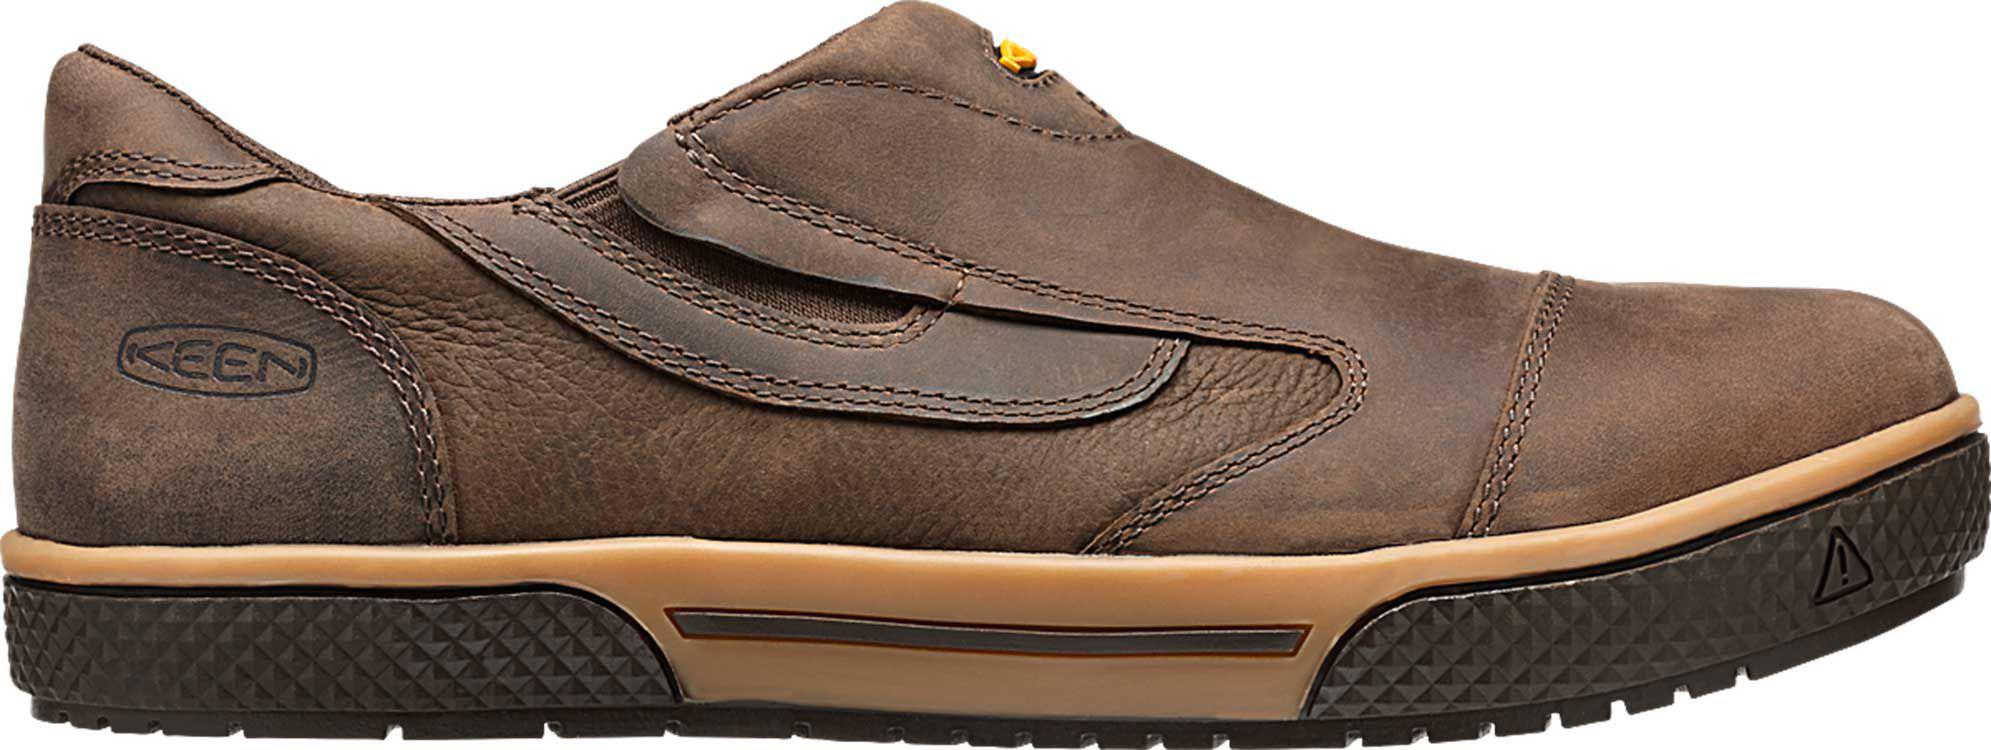 keen slip on work shoes